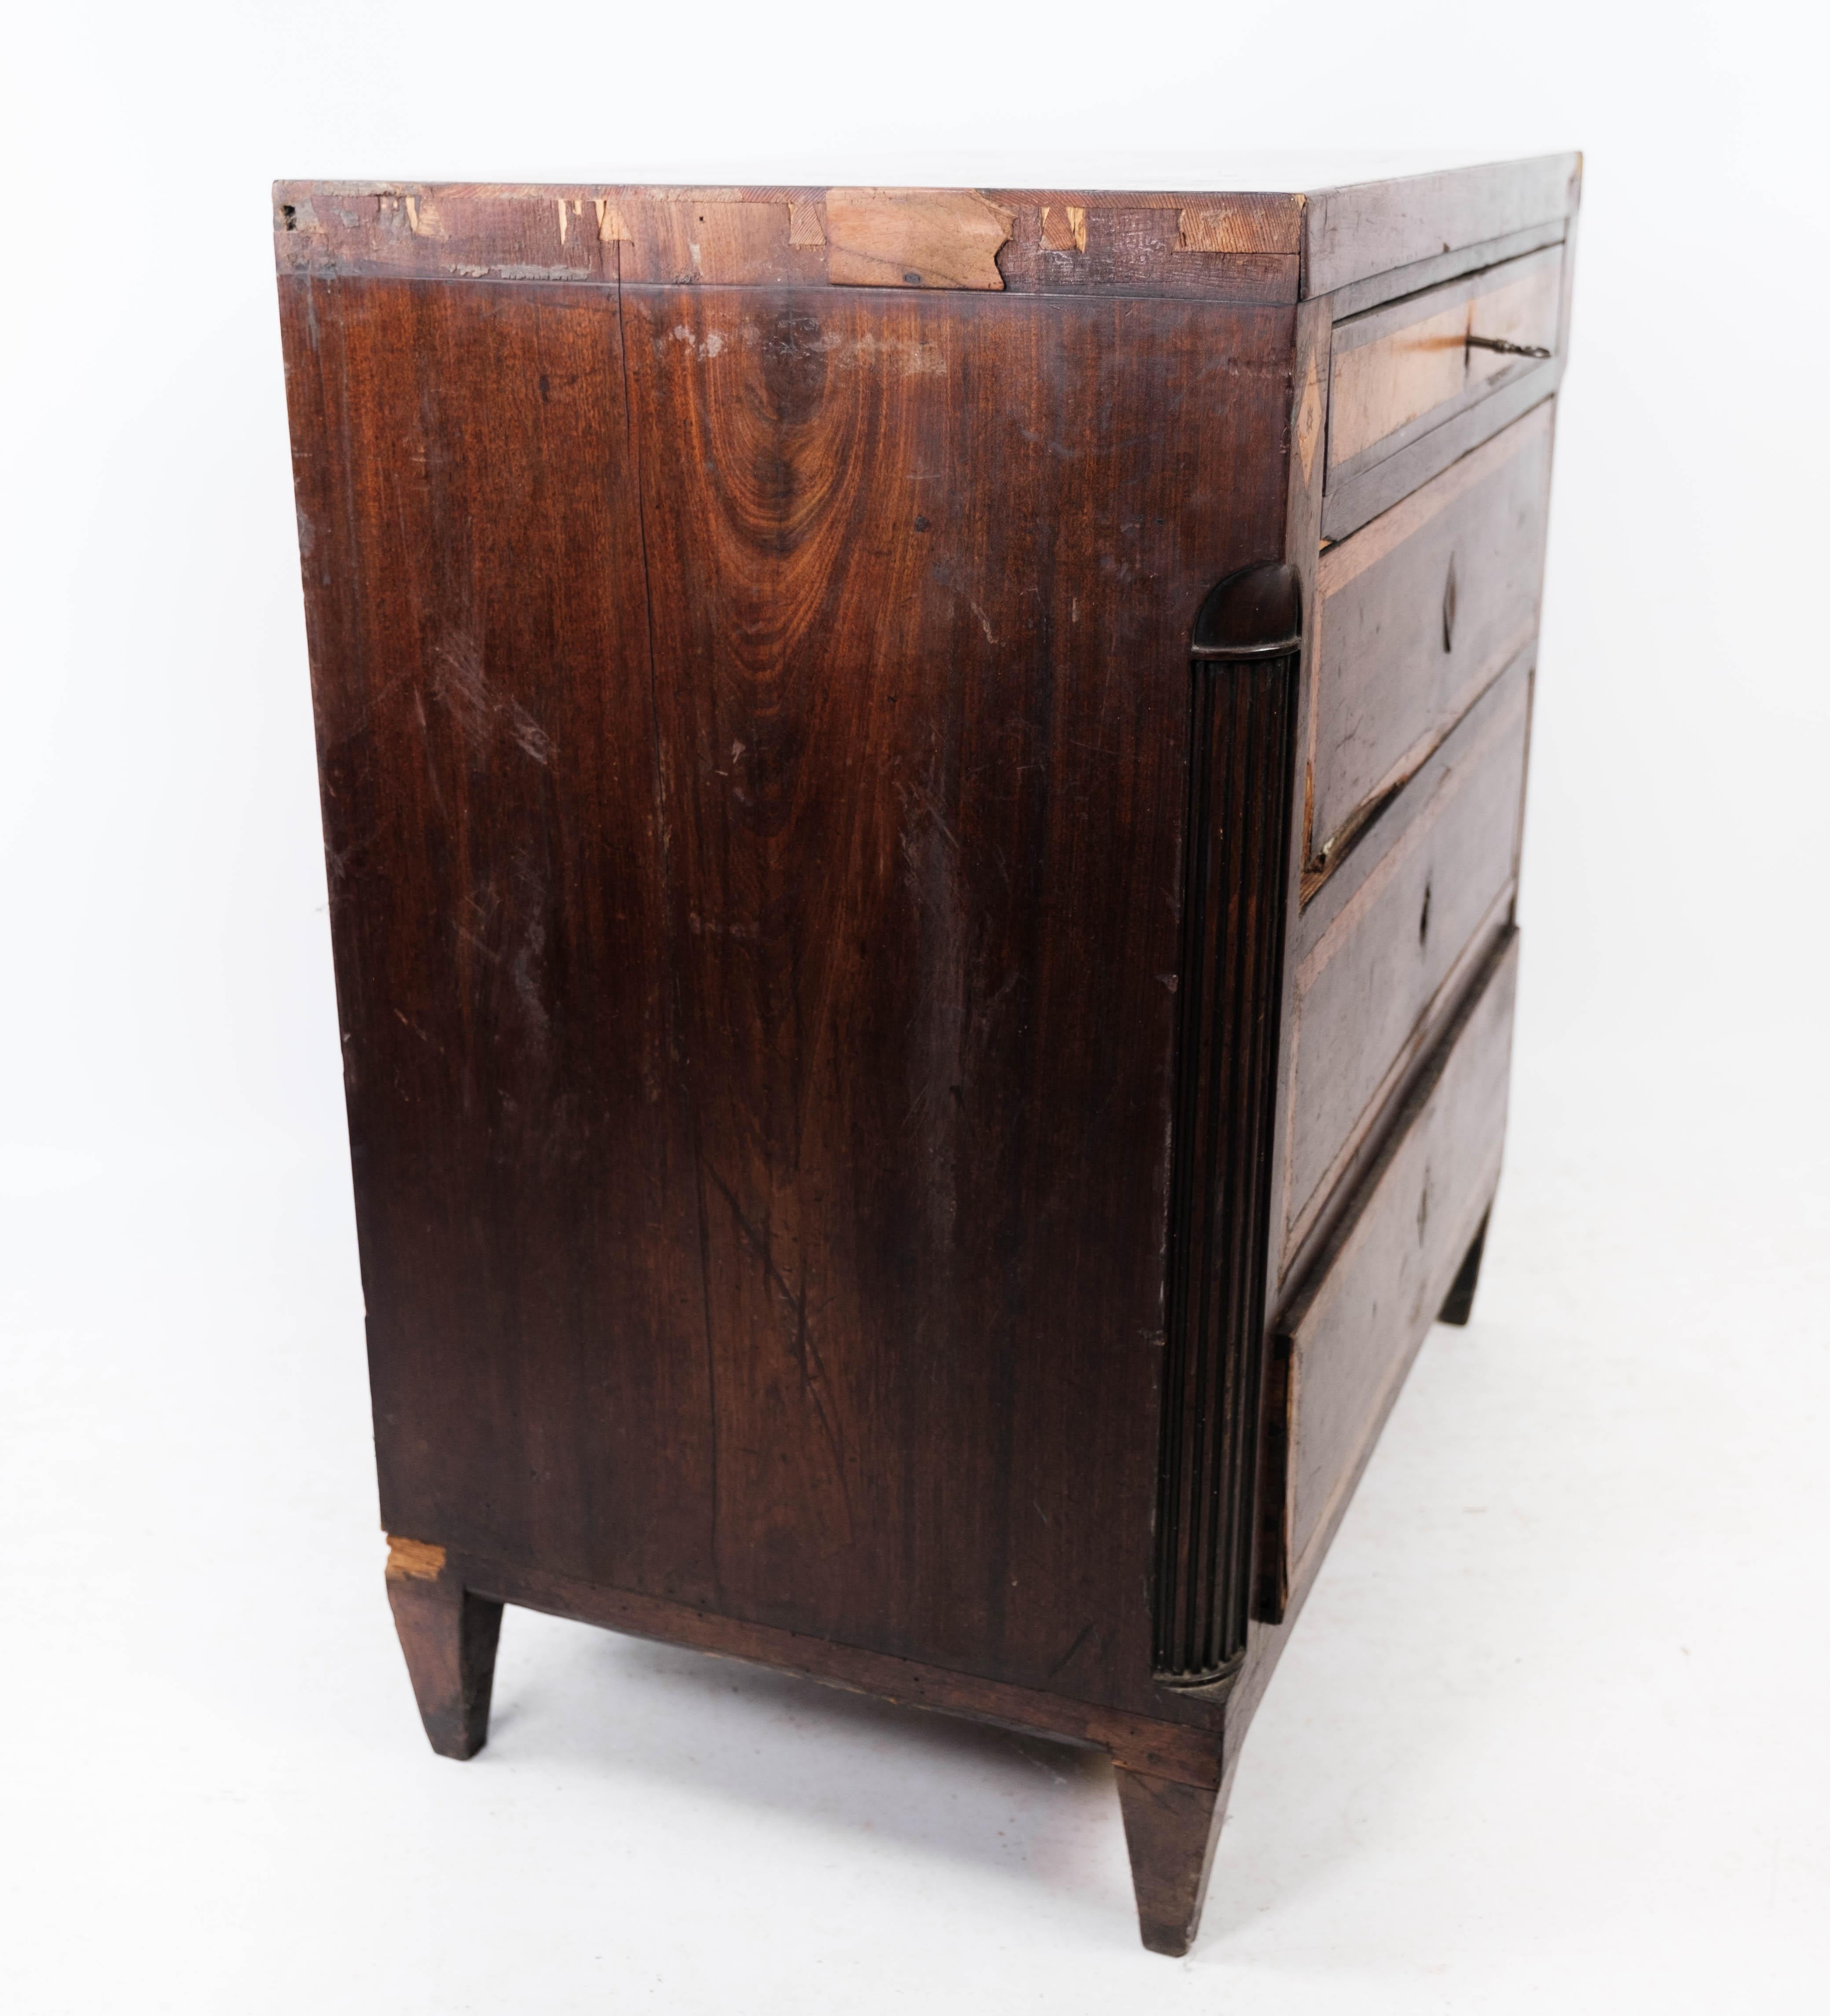 Louis Seize Chest of Drawers Made In Mahogany With Inlaid Wood From 1790s For Sale 4